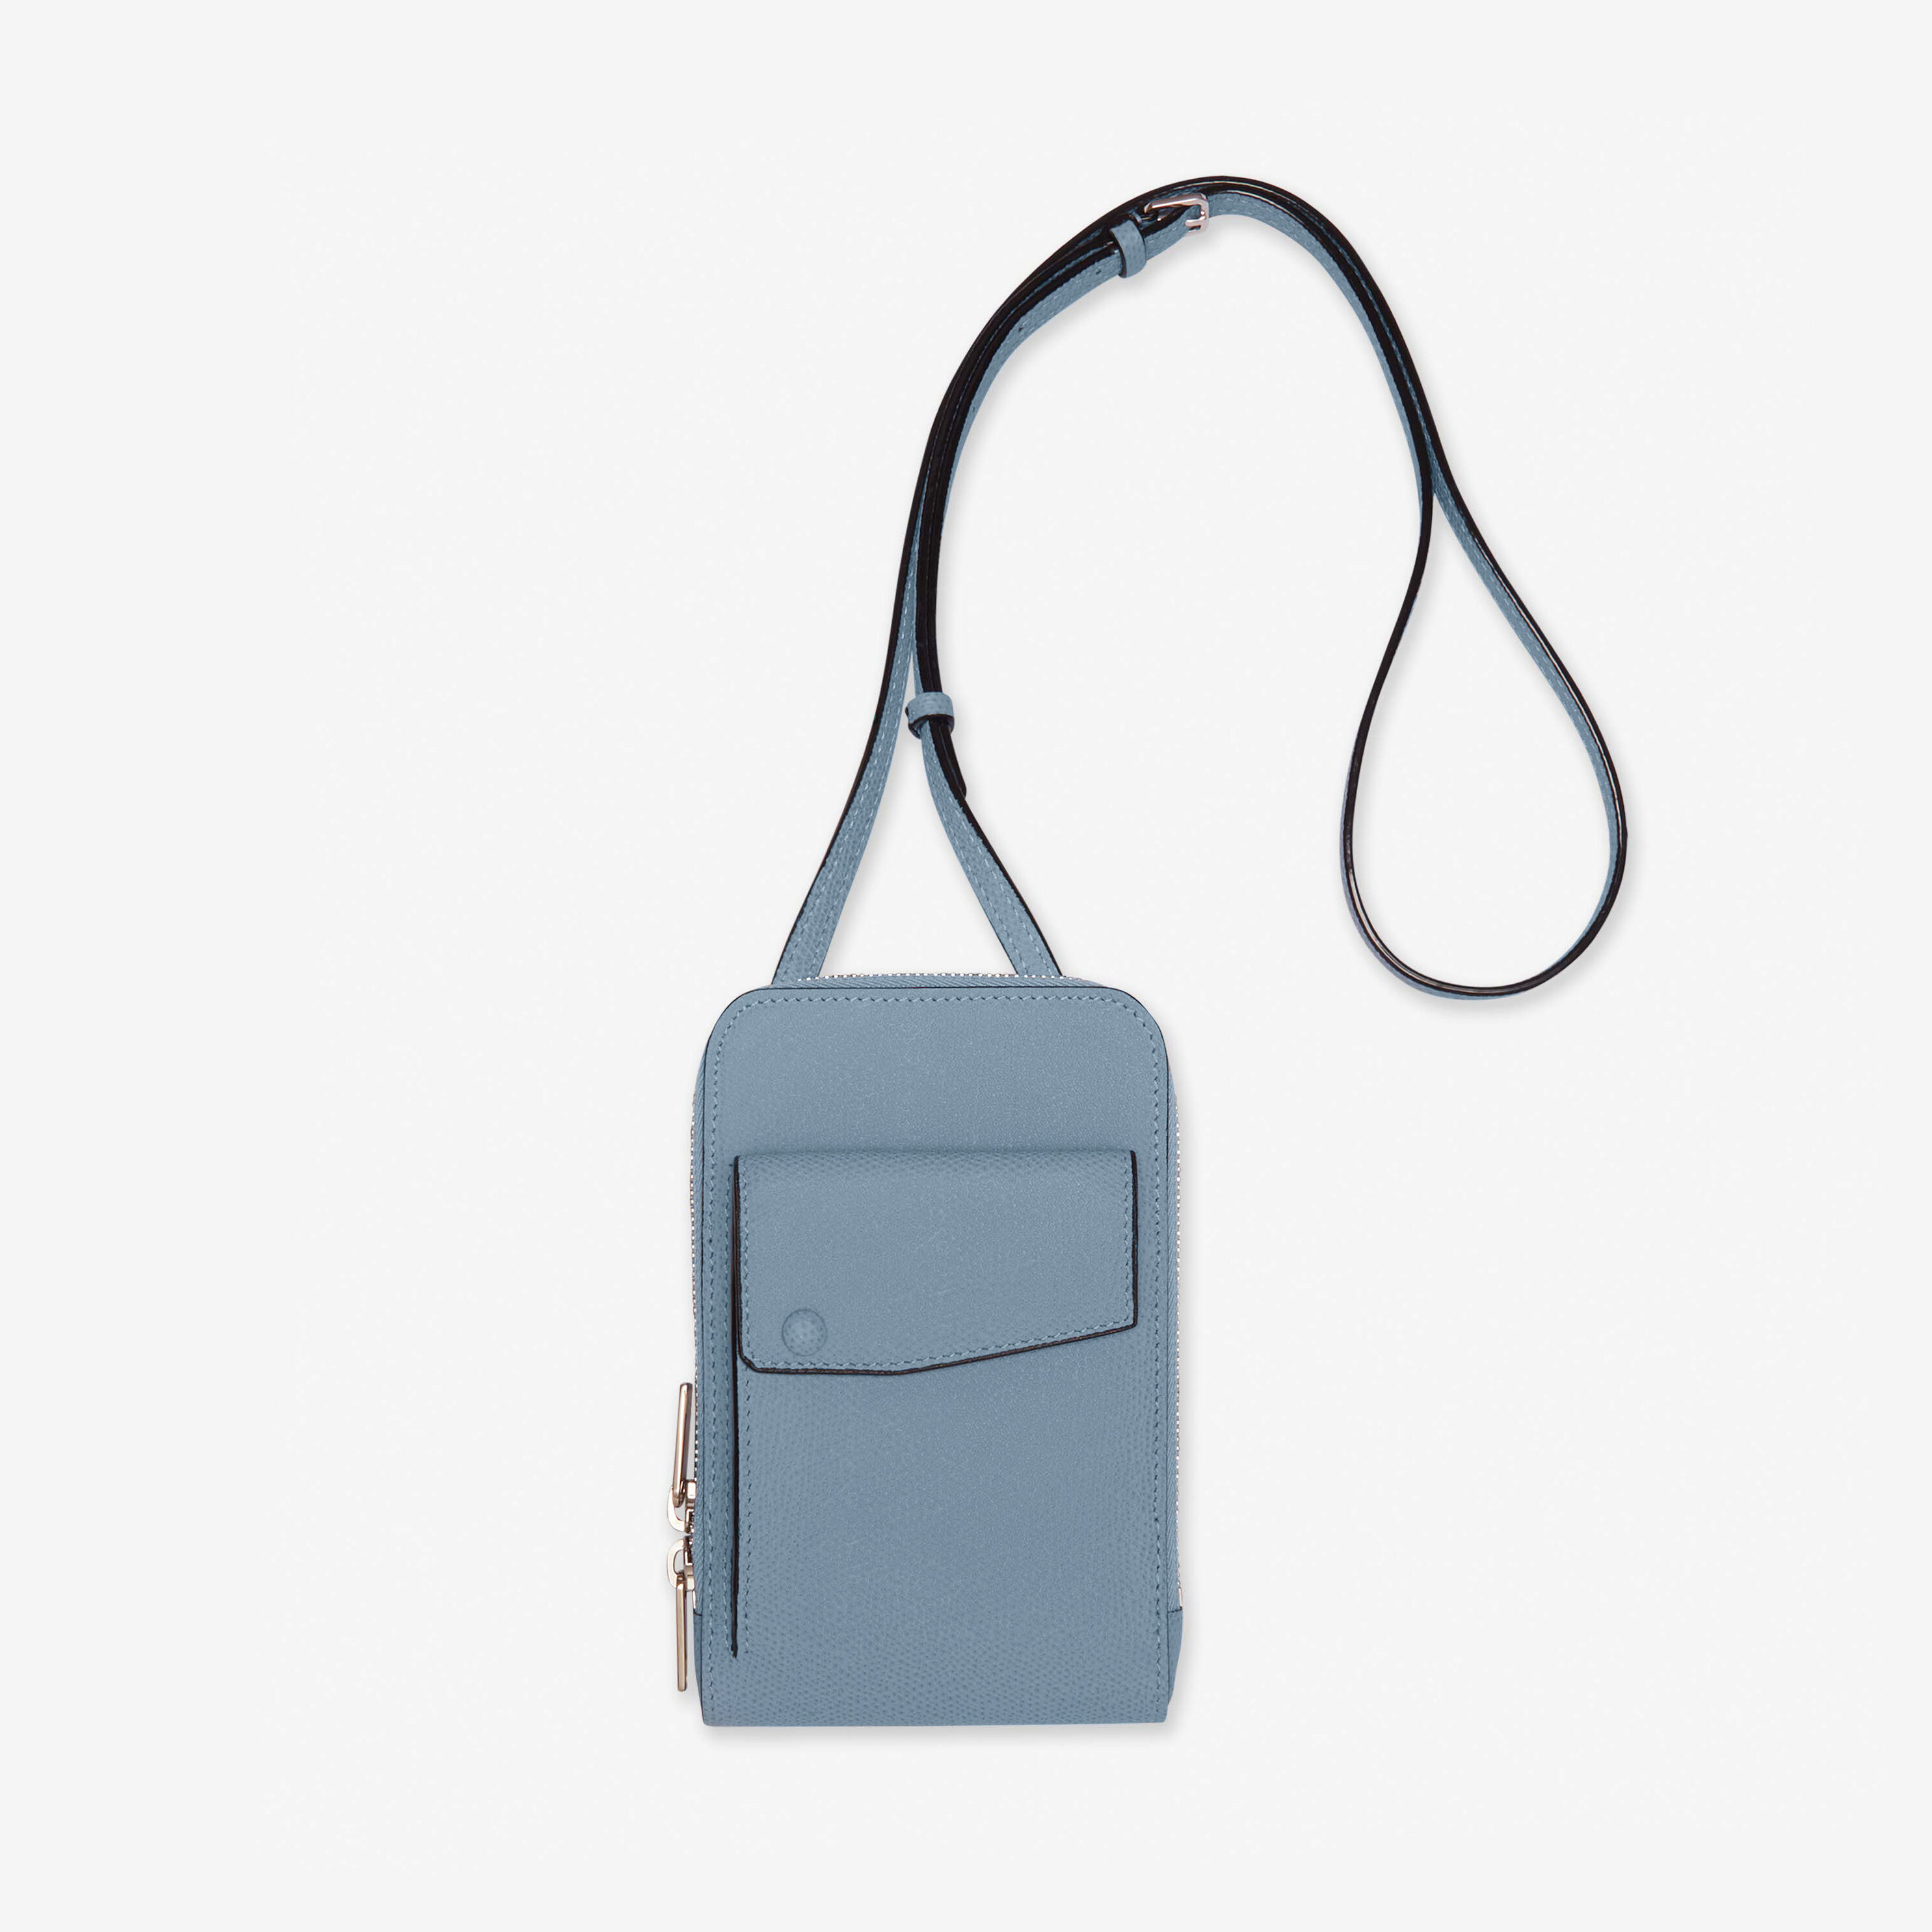 Light blue phone pouch with shoulder strap | Valextra Pocket